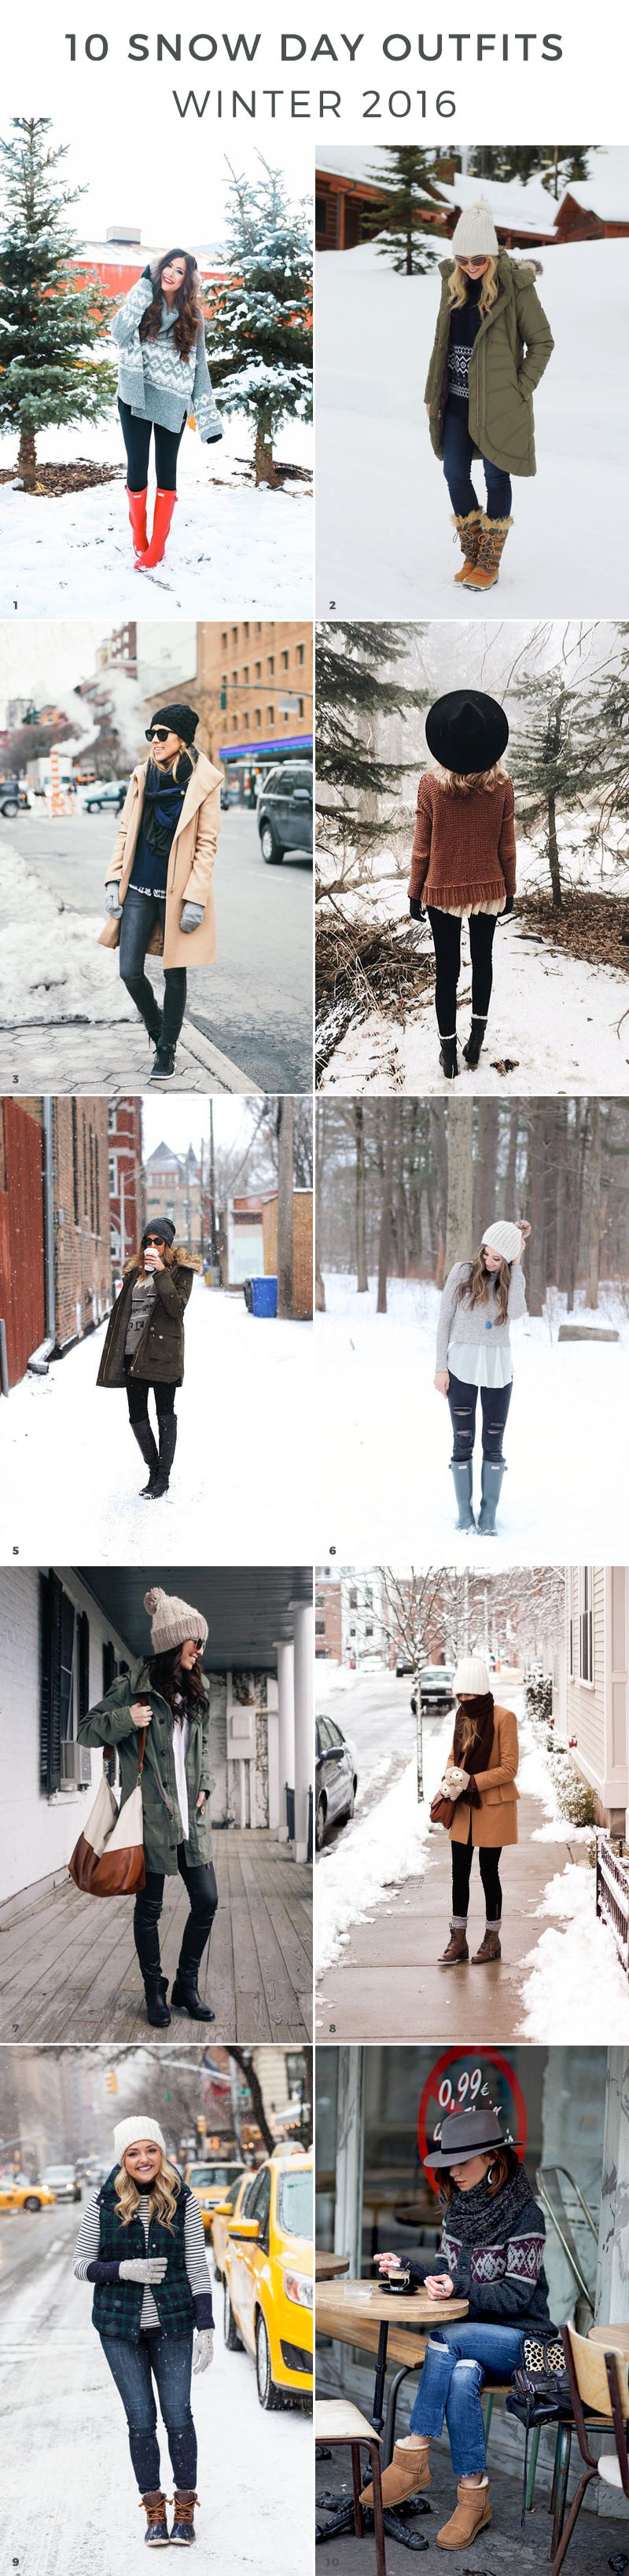 snowday outfits, snow day outfits, winter outfits, winter outfit ideas, snow day outfit ideas, outfits for snow, cold weather outfits, winter style, winter fashion trends, heavy coats, oversized sweaters, hunter boots, layered outfits, cute hats, winter hats, beanies via Advicefroma20Something.com